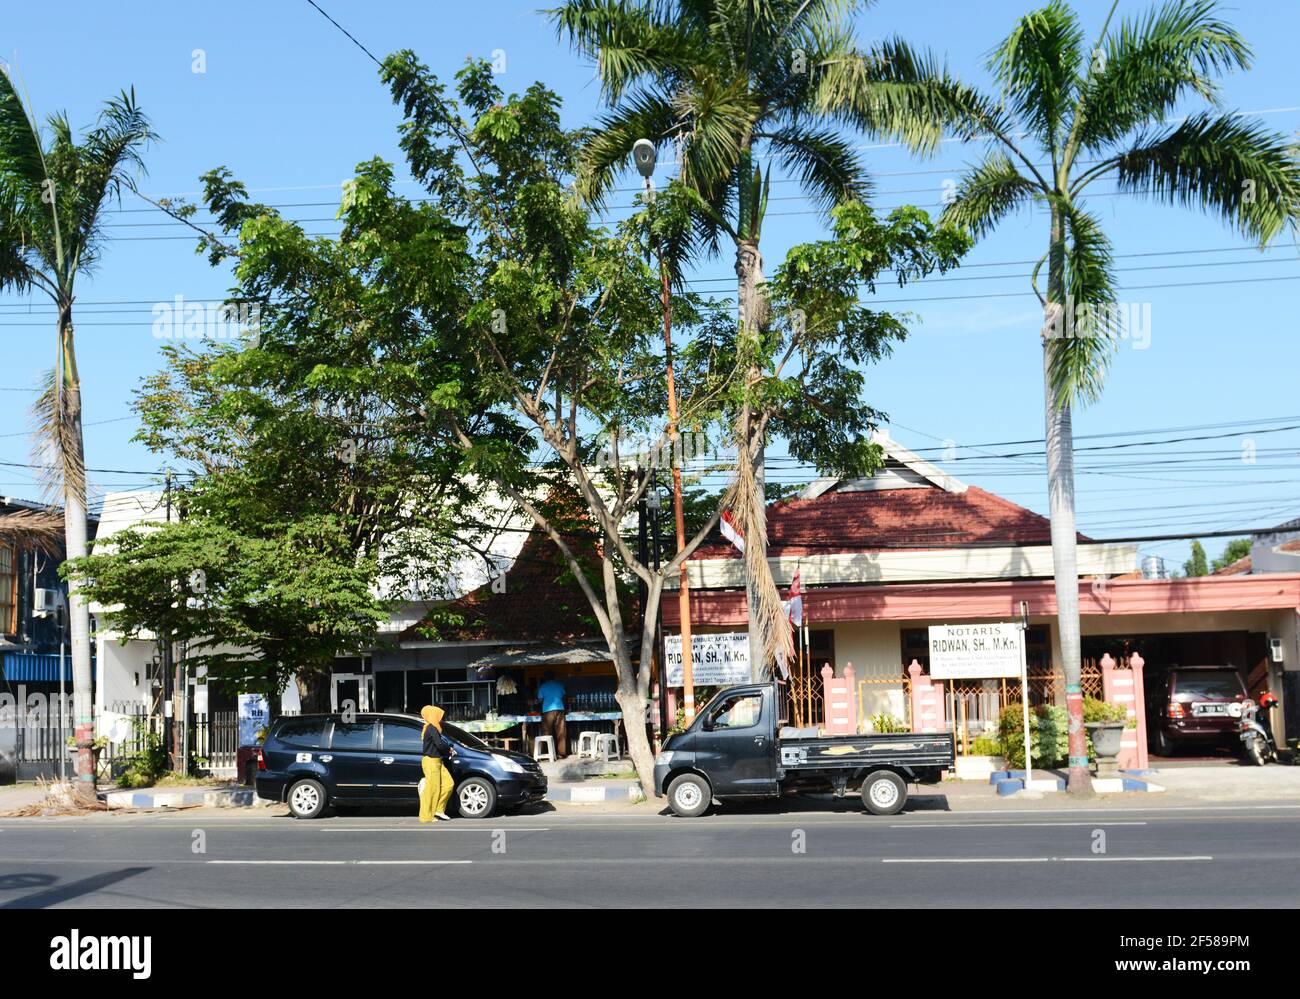 The peaceful town of Banyuwangi in Java, Indonesia. Stock Photo